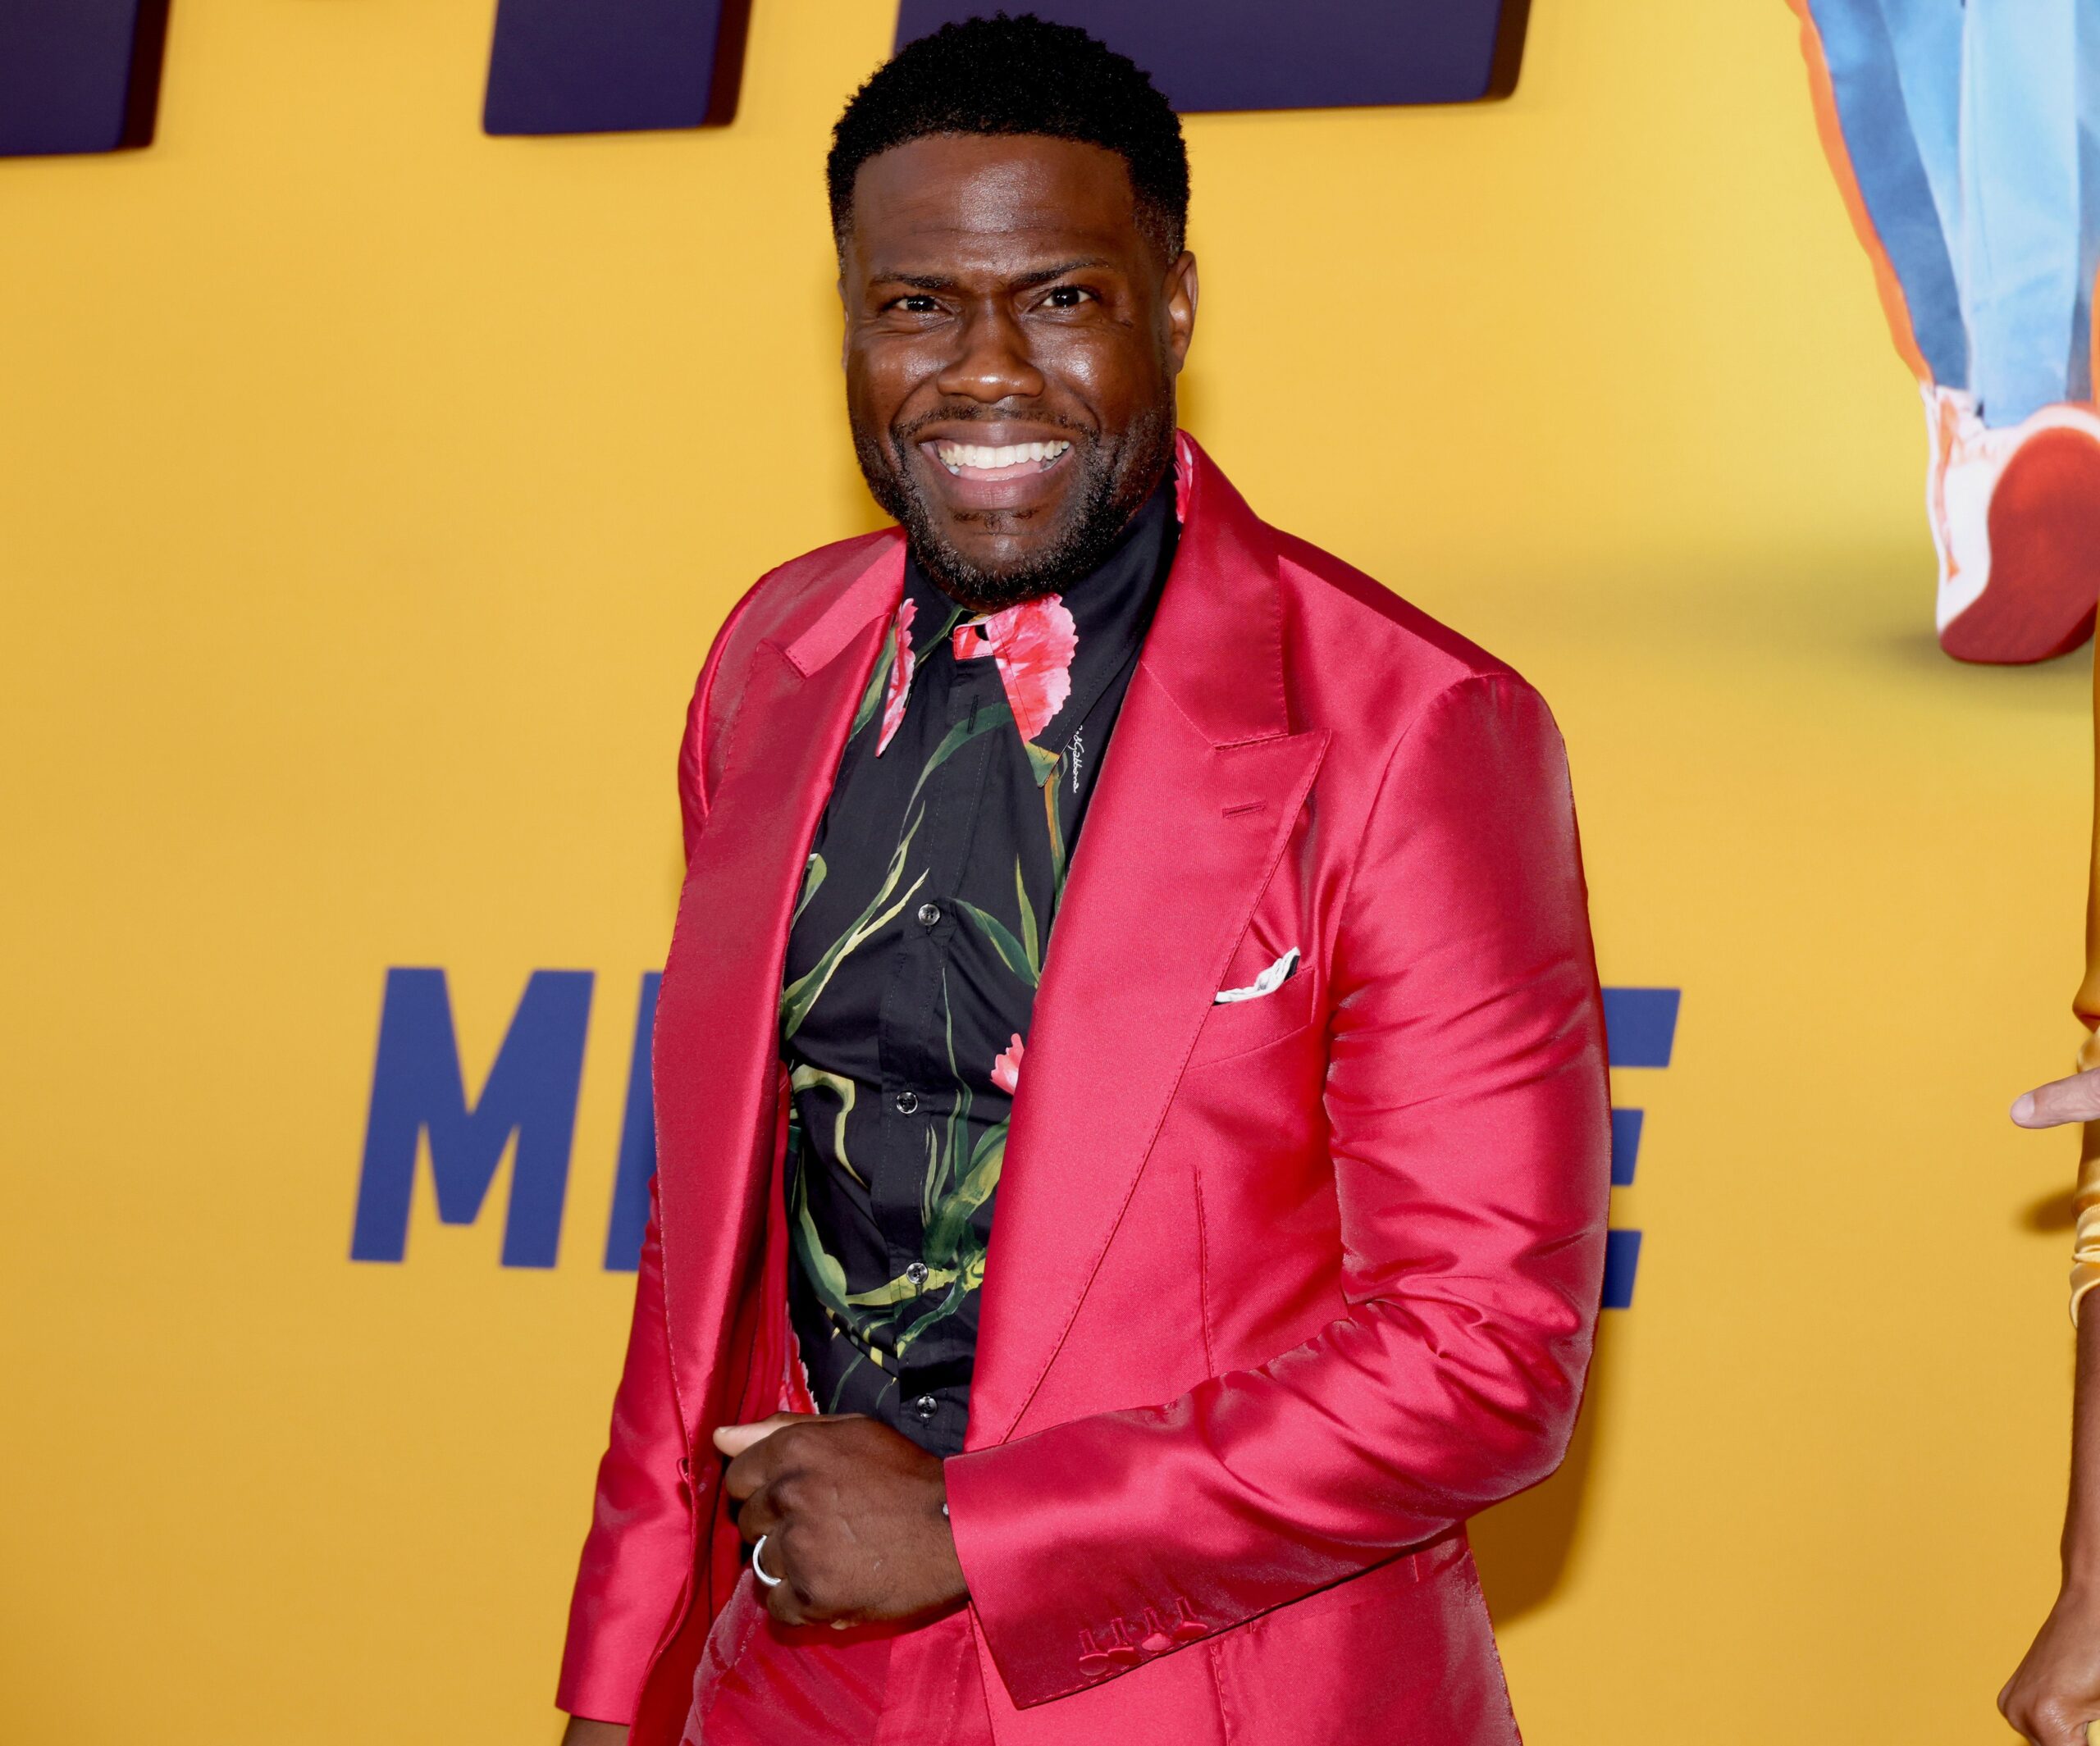 'Die Hart 2' Ending Explained: Will Kevin Hart Return for a Third Installment?